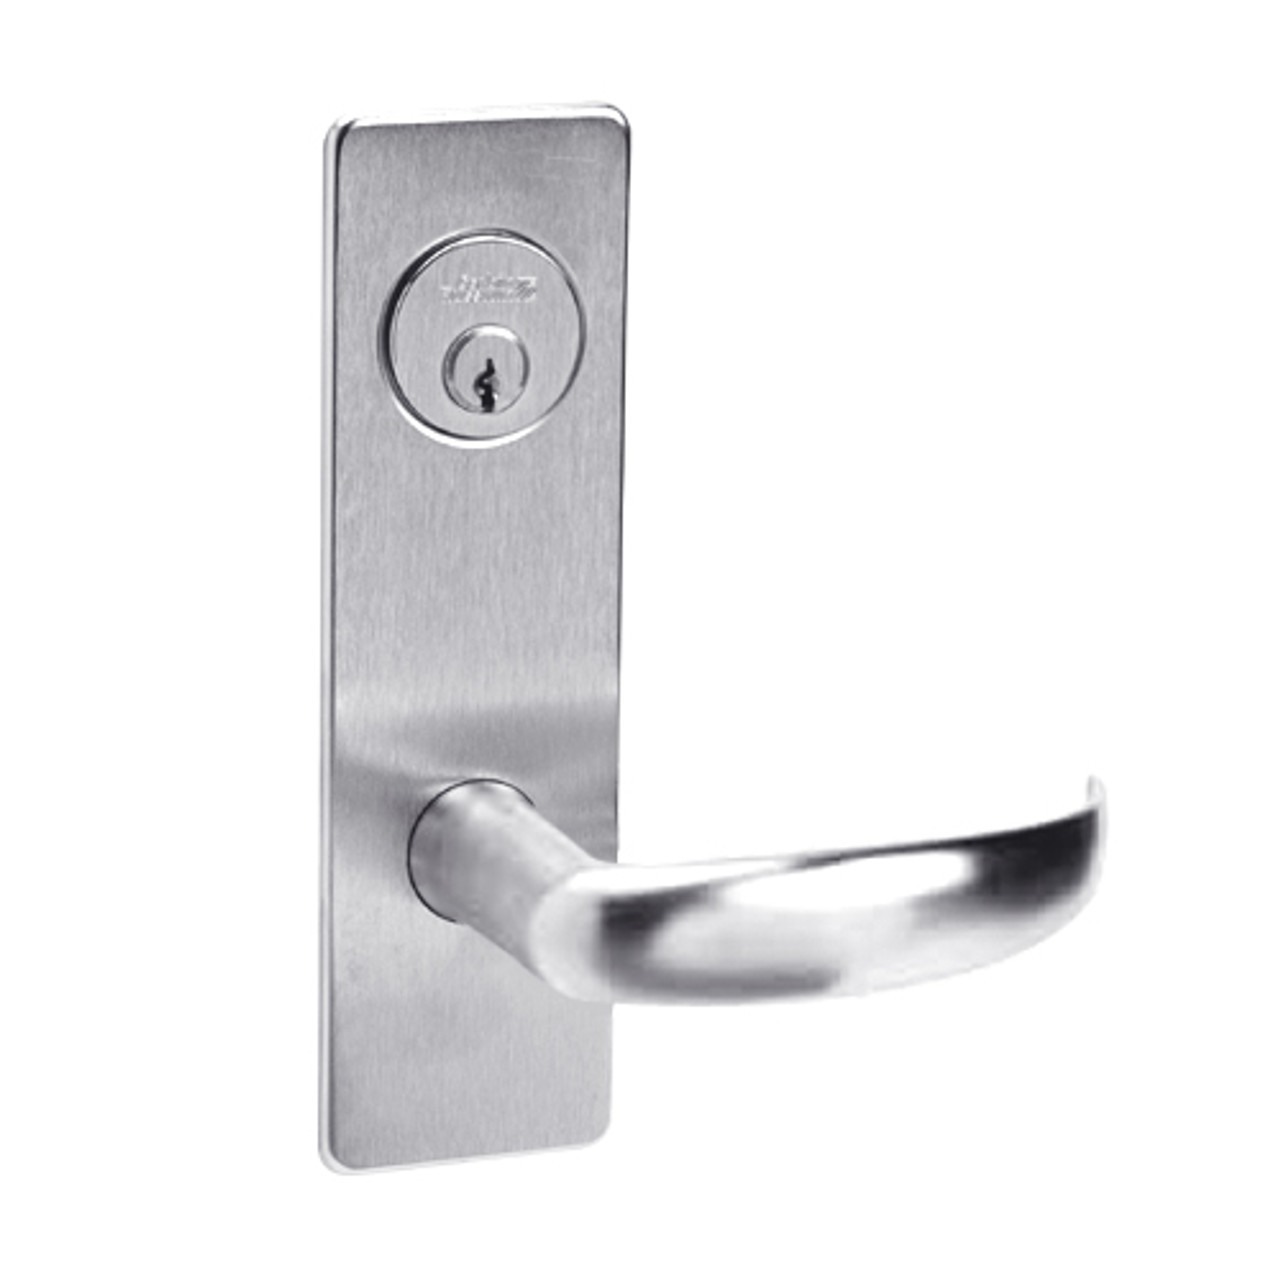 ML2057-PSR-629 Corbin Russwin ML2000 Series Mortise Storeroom Locksets with Princeton Lever in Bright Stainless Steel